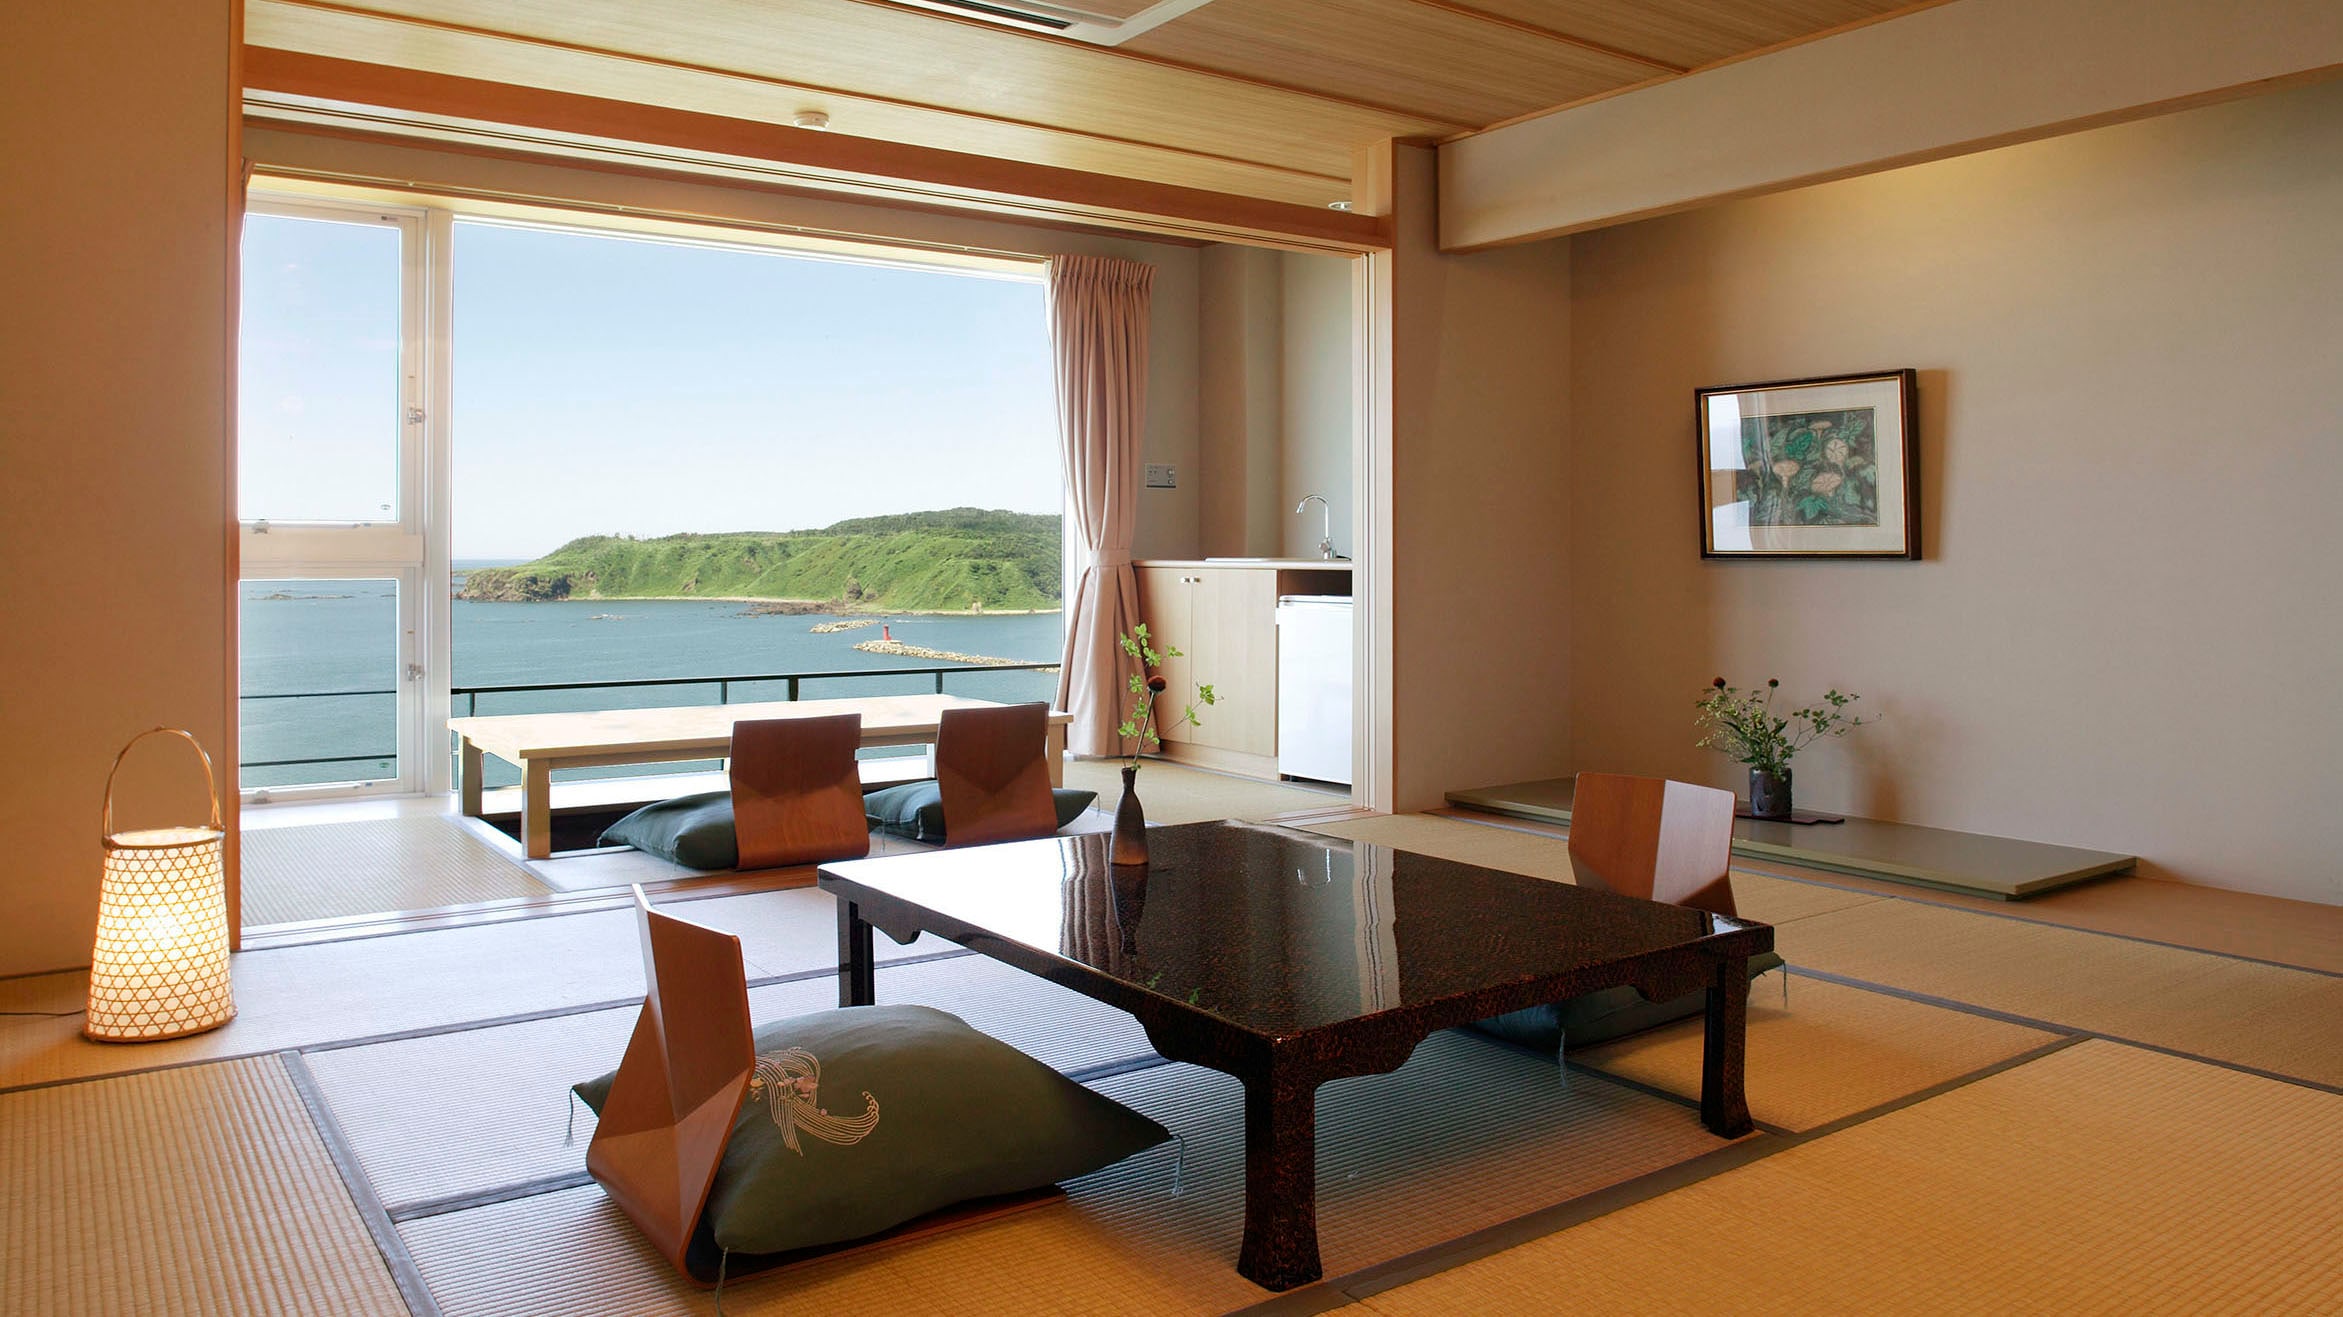 [Non-smoking, north wind-new building-] Japanese-style room with 12 tatami mats overlooking Toga Bay + wide rim